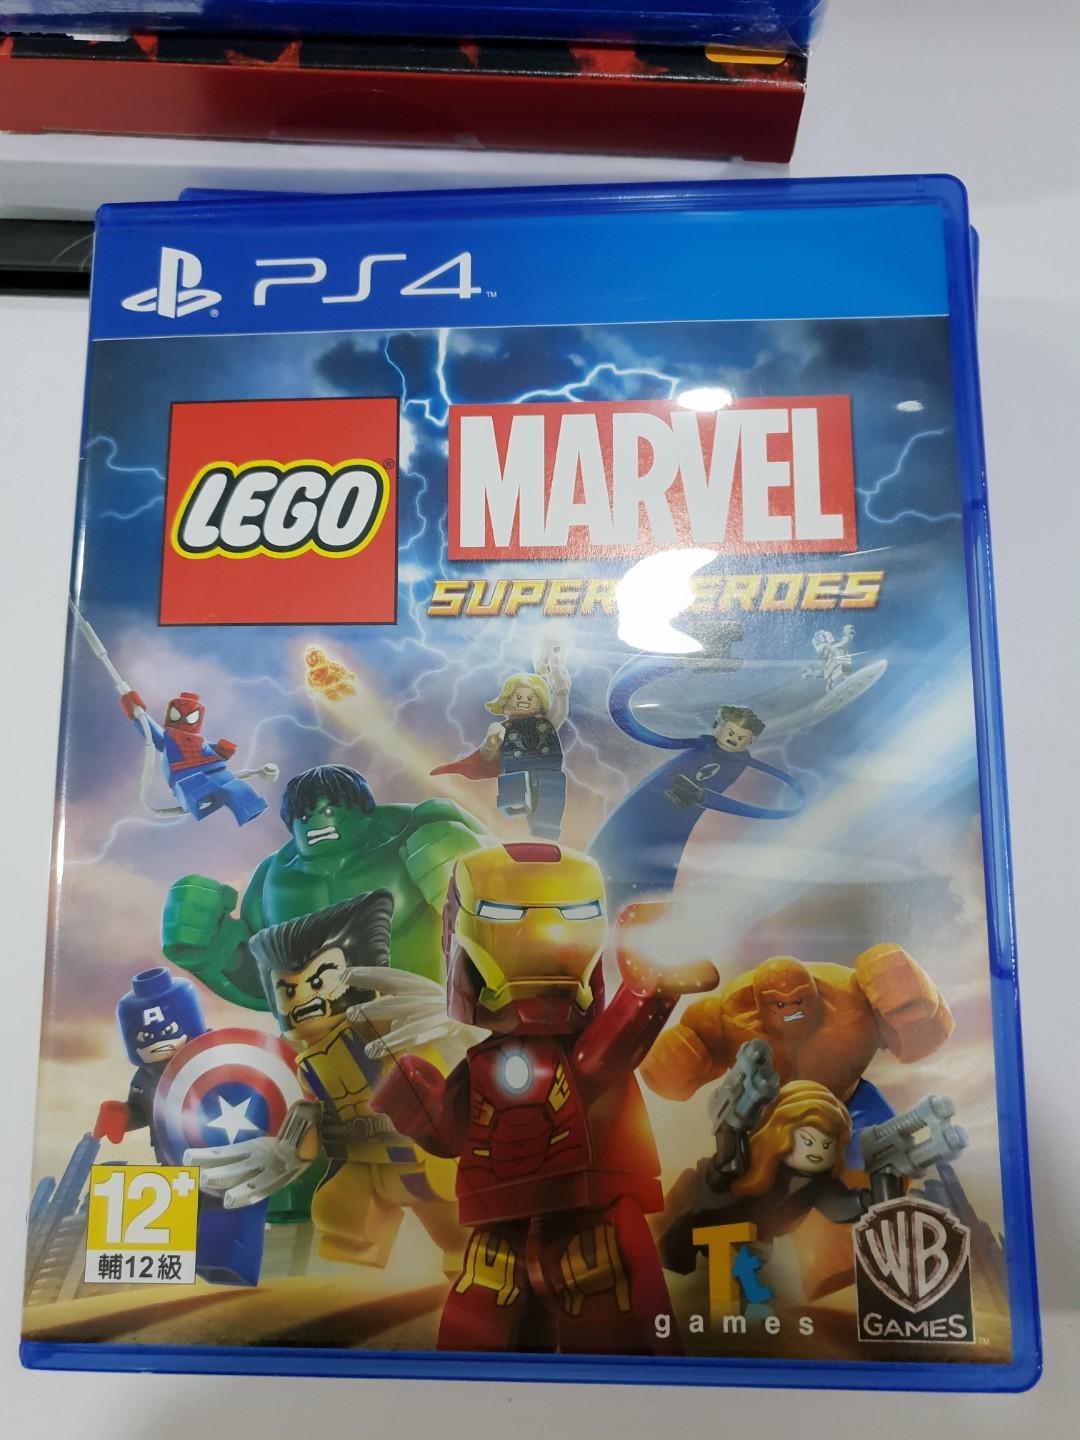 Ps4 Lego Marvel Super Heroes Toys Games Video Gaming Video Games On Carousell